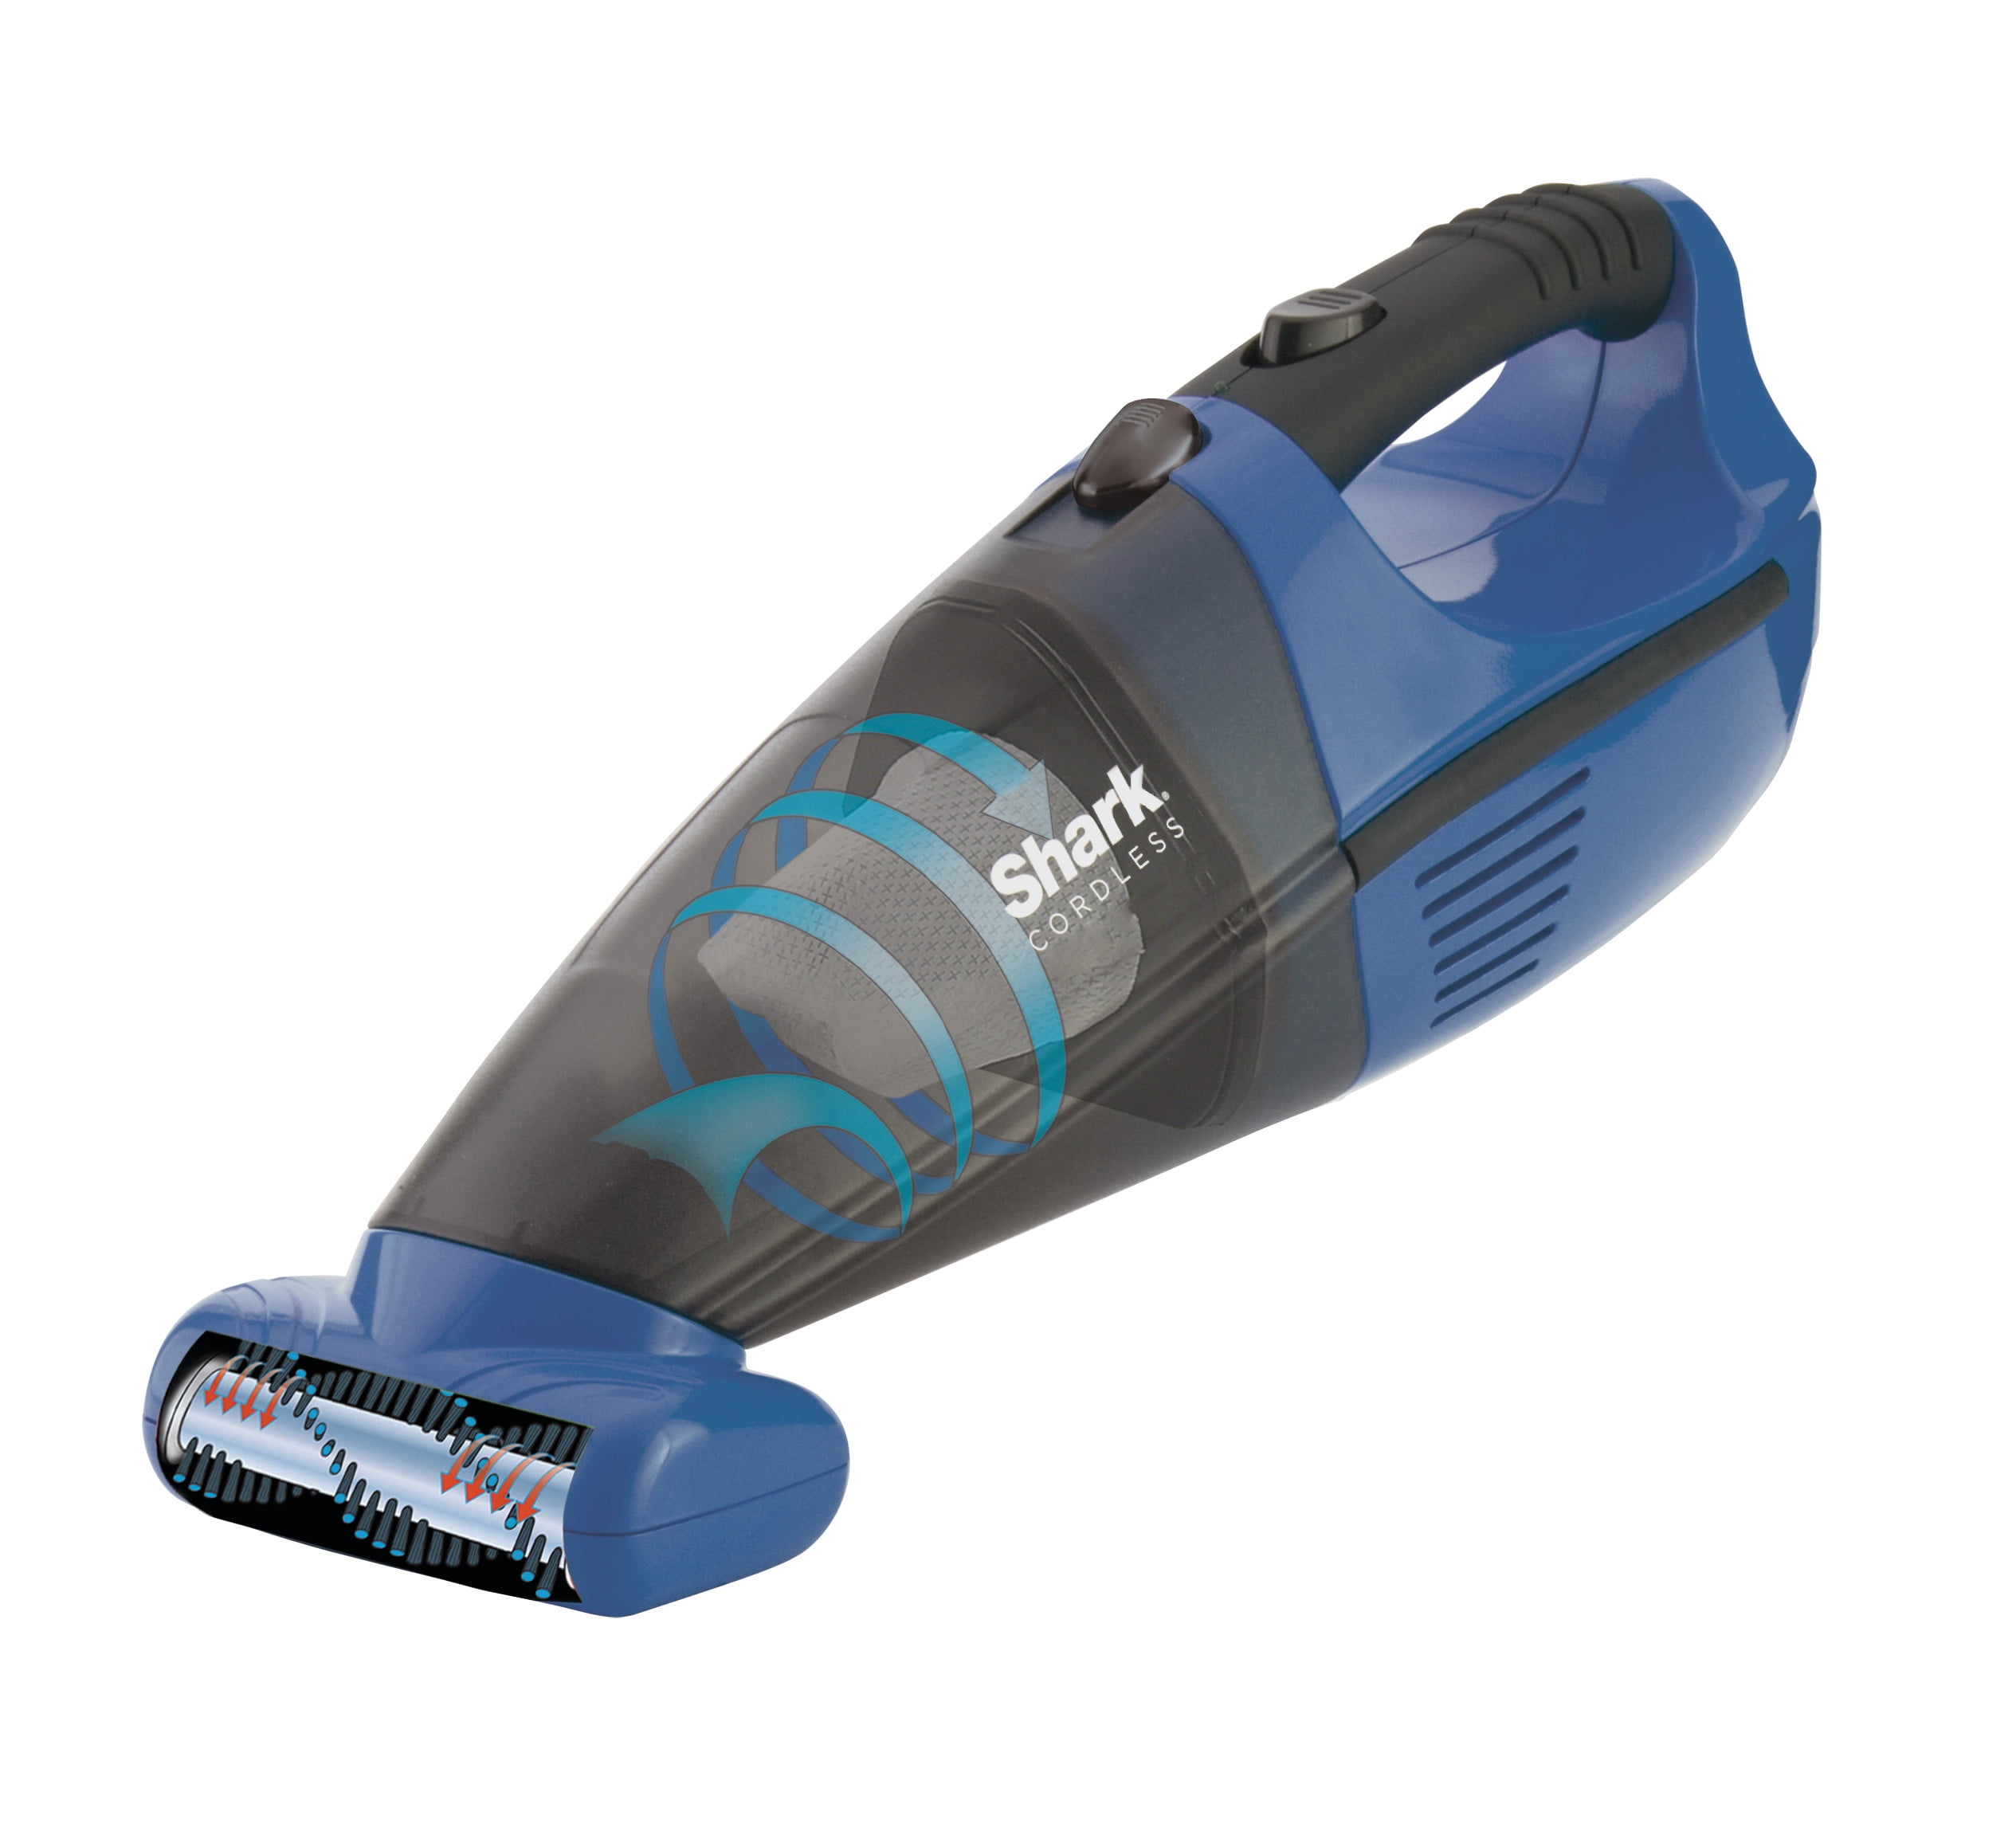 This Handheld Vacuum Is on Sale for Just $50 at